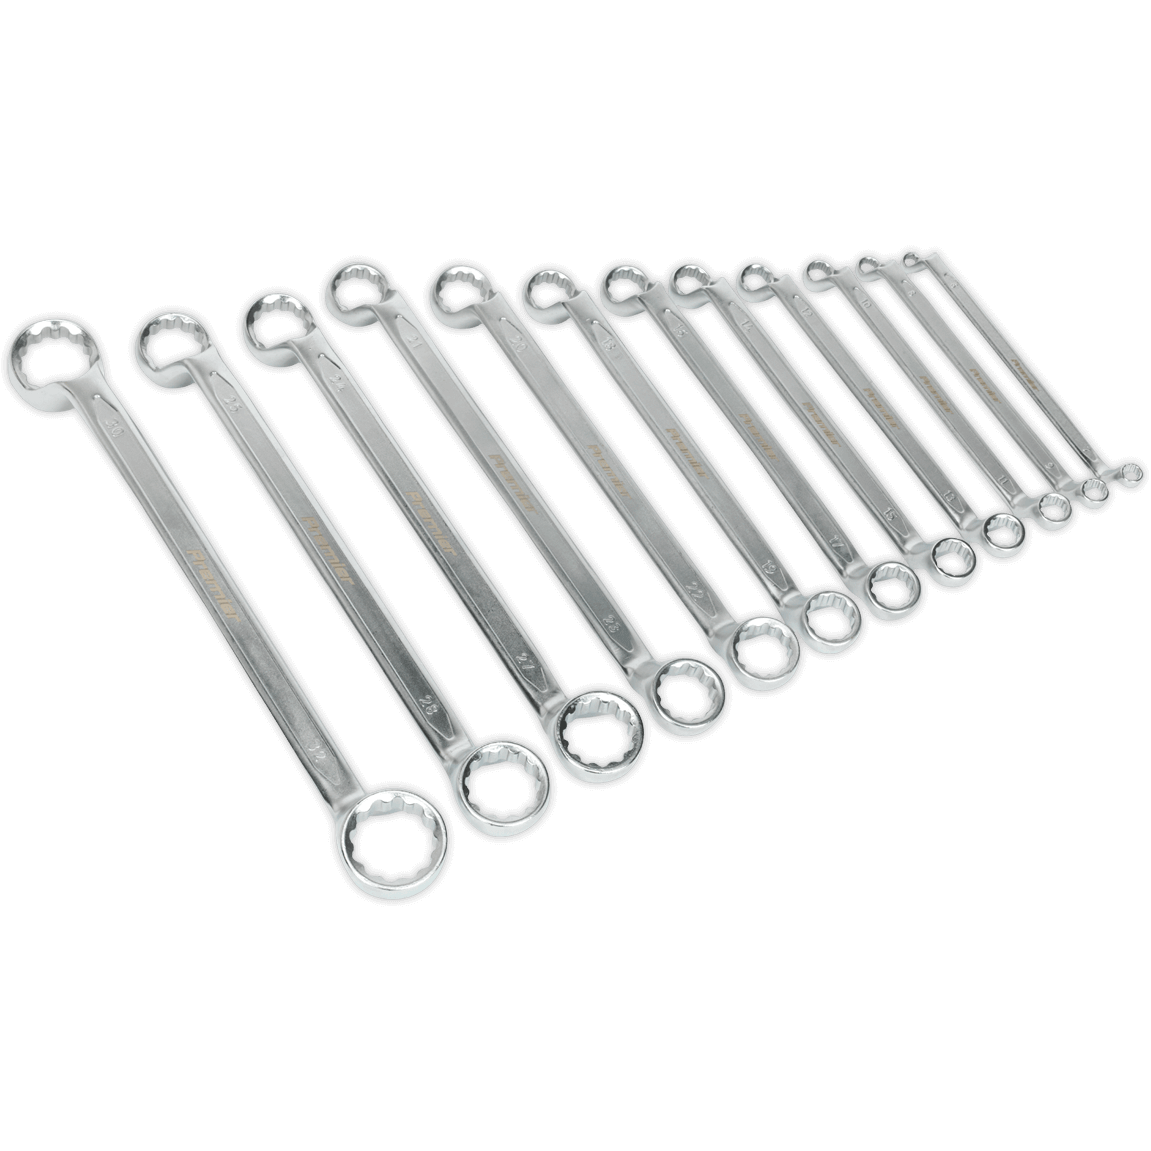 Sealey 12 Piece Offset Double Ring Spanner Set